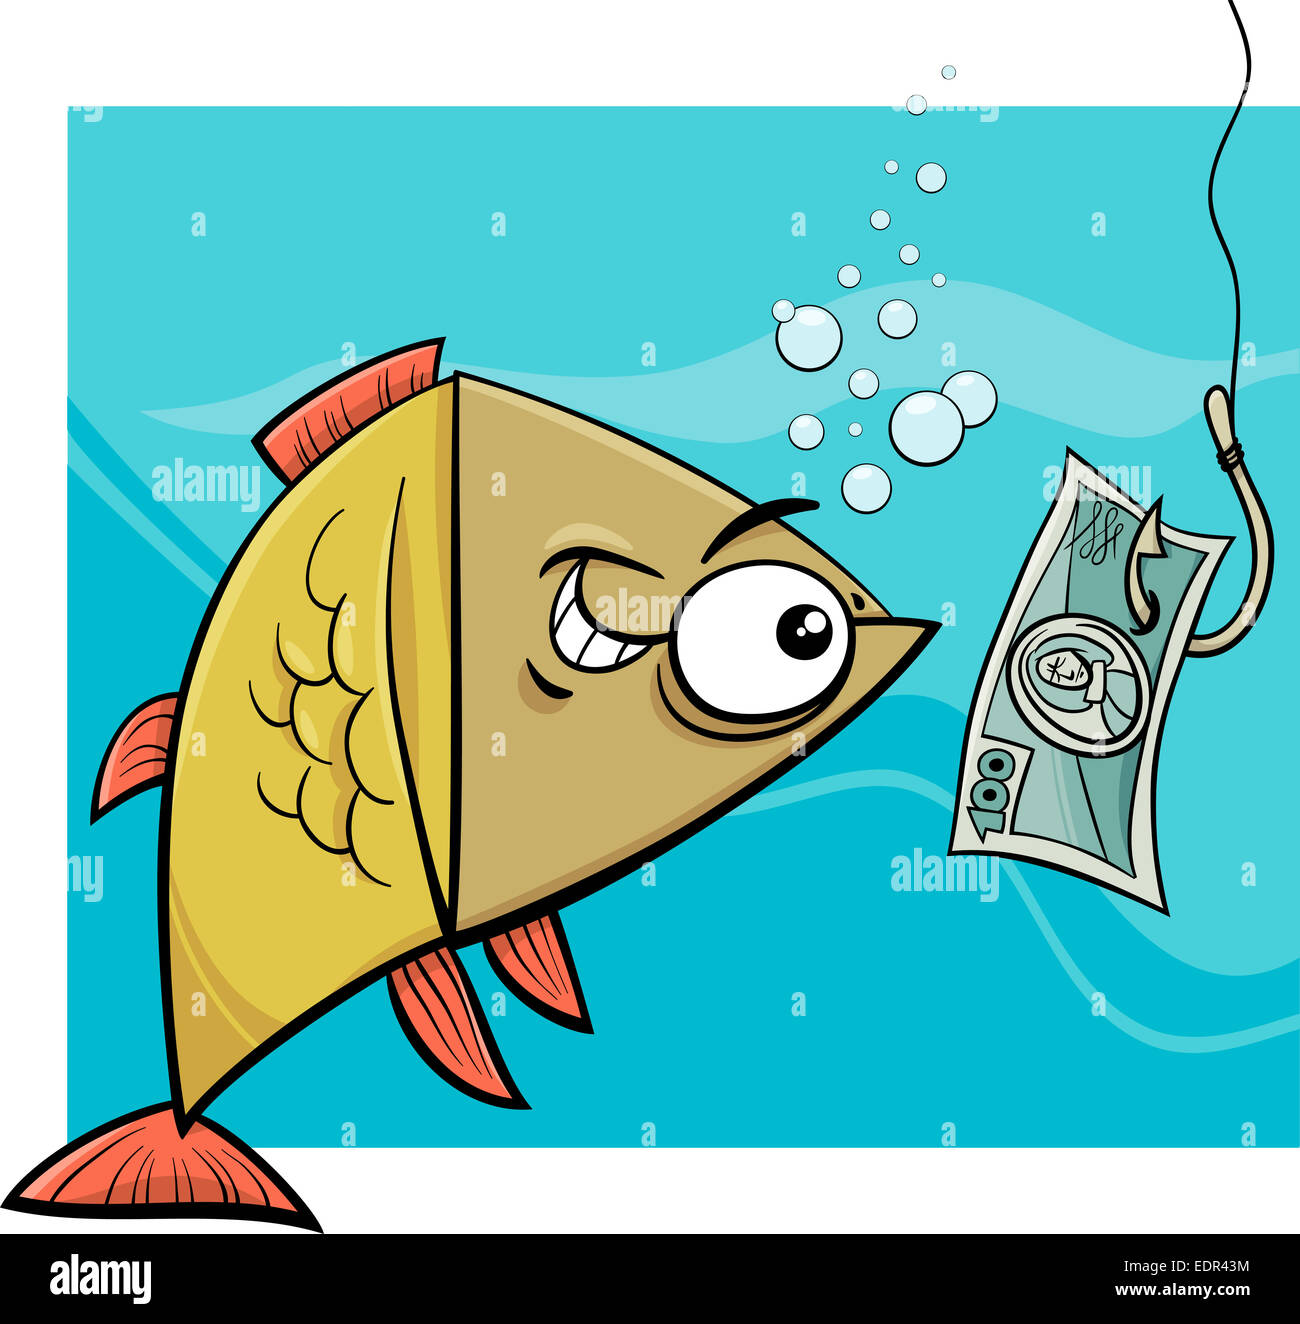 Cartoon Concept Humor Illustration of Funny Fish and Fishing Hook with  Money Bait Stock Photo - Alamy